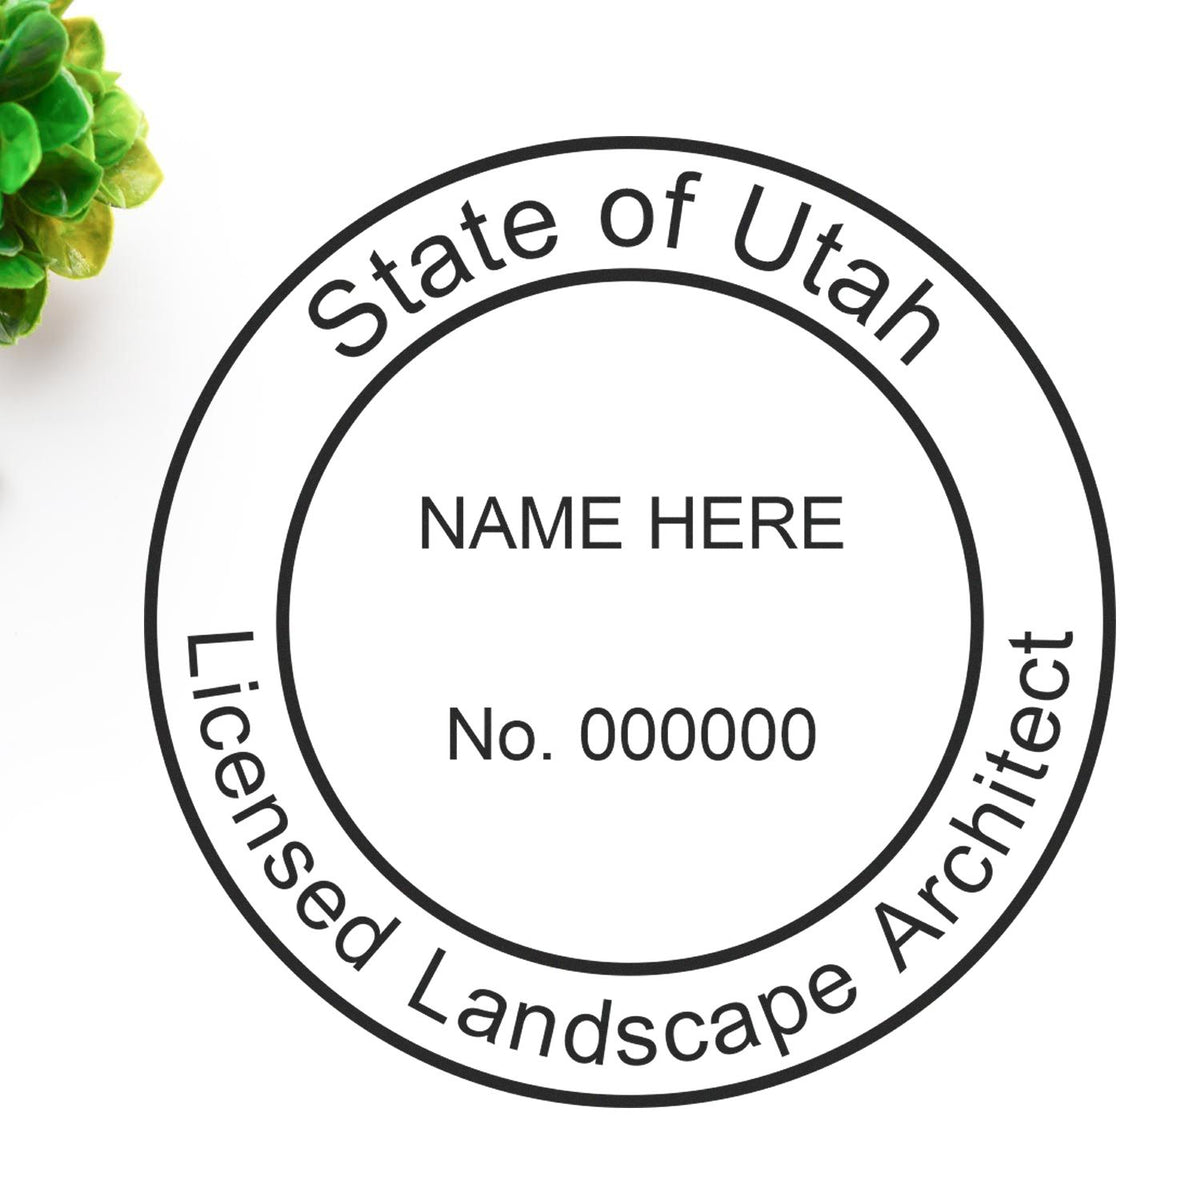 This paper is stamped with a sample imprint of the Premium MaxLight Pre-Inked Utah Landscape Architectural Stamp, signifying its quality and reliability.